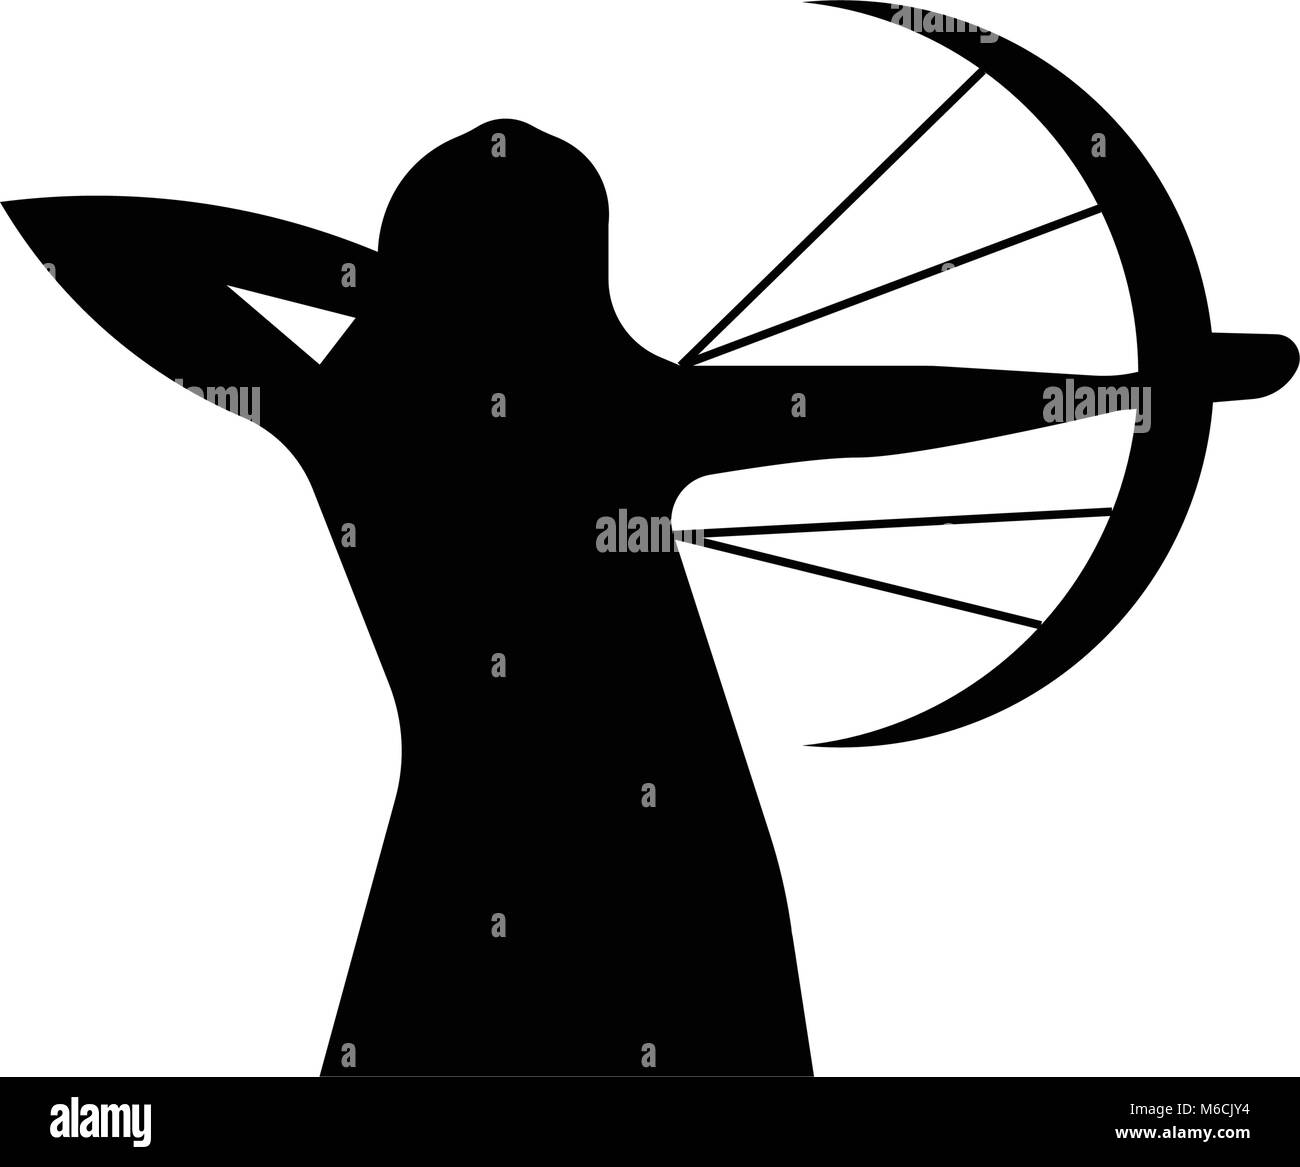 compound bow silhouette on white background Stock Vector